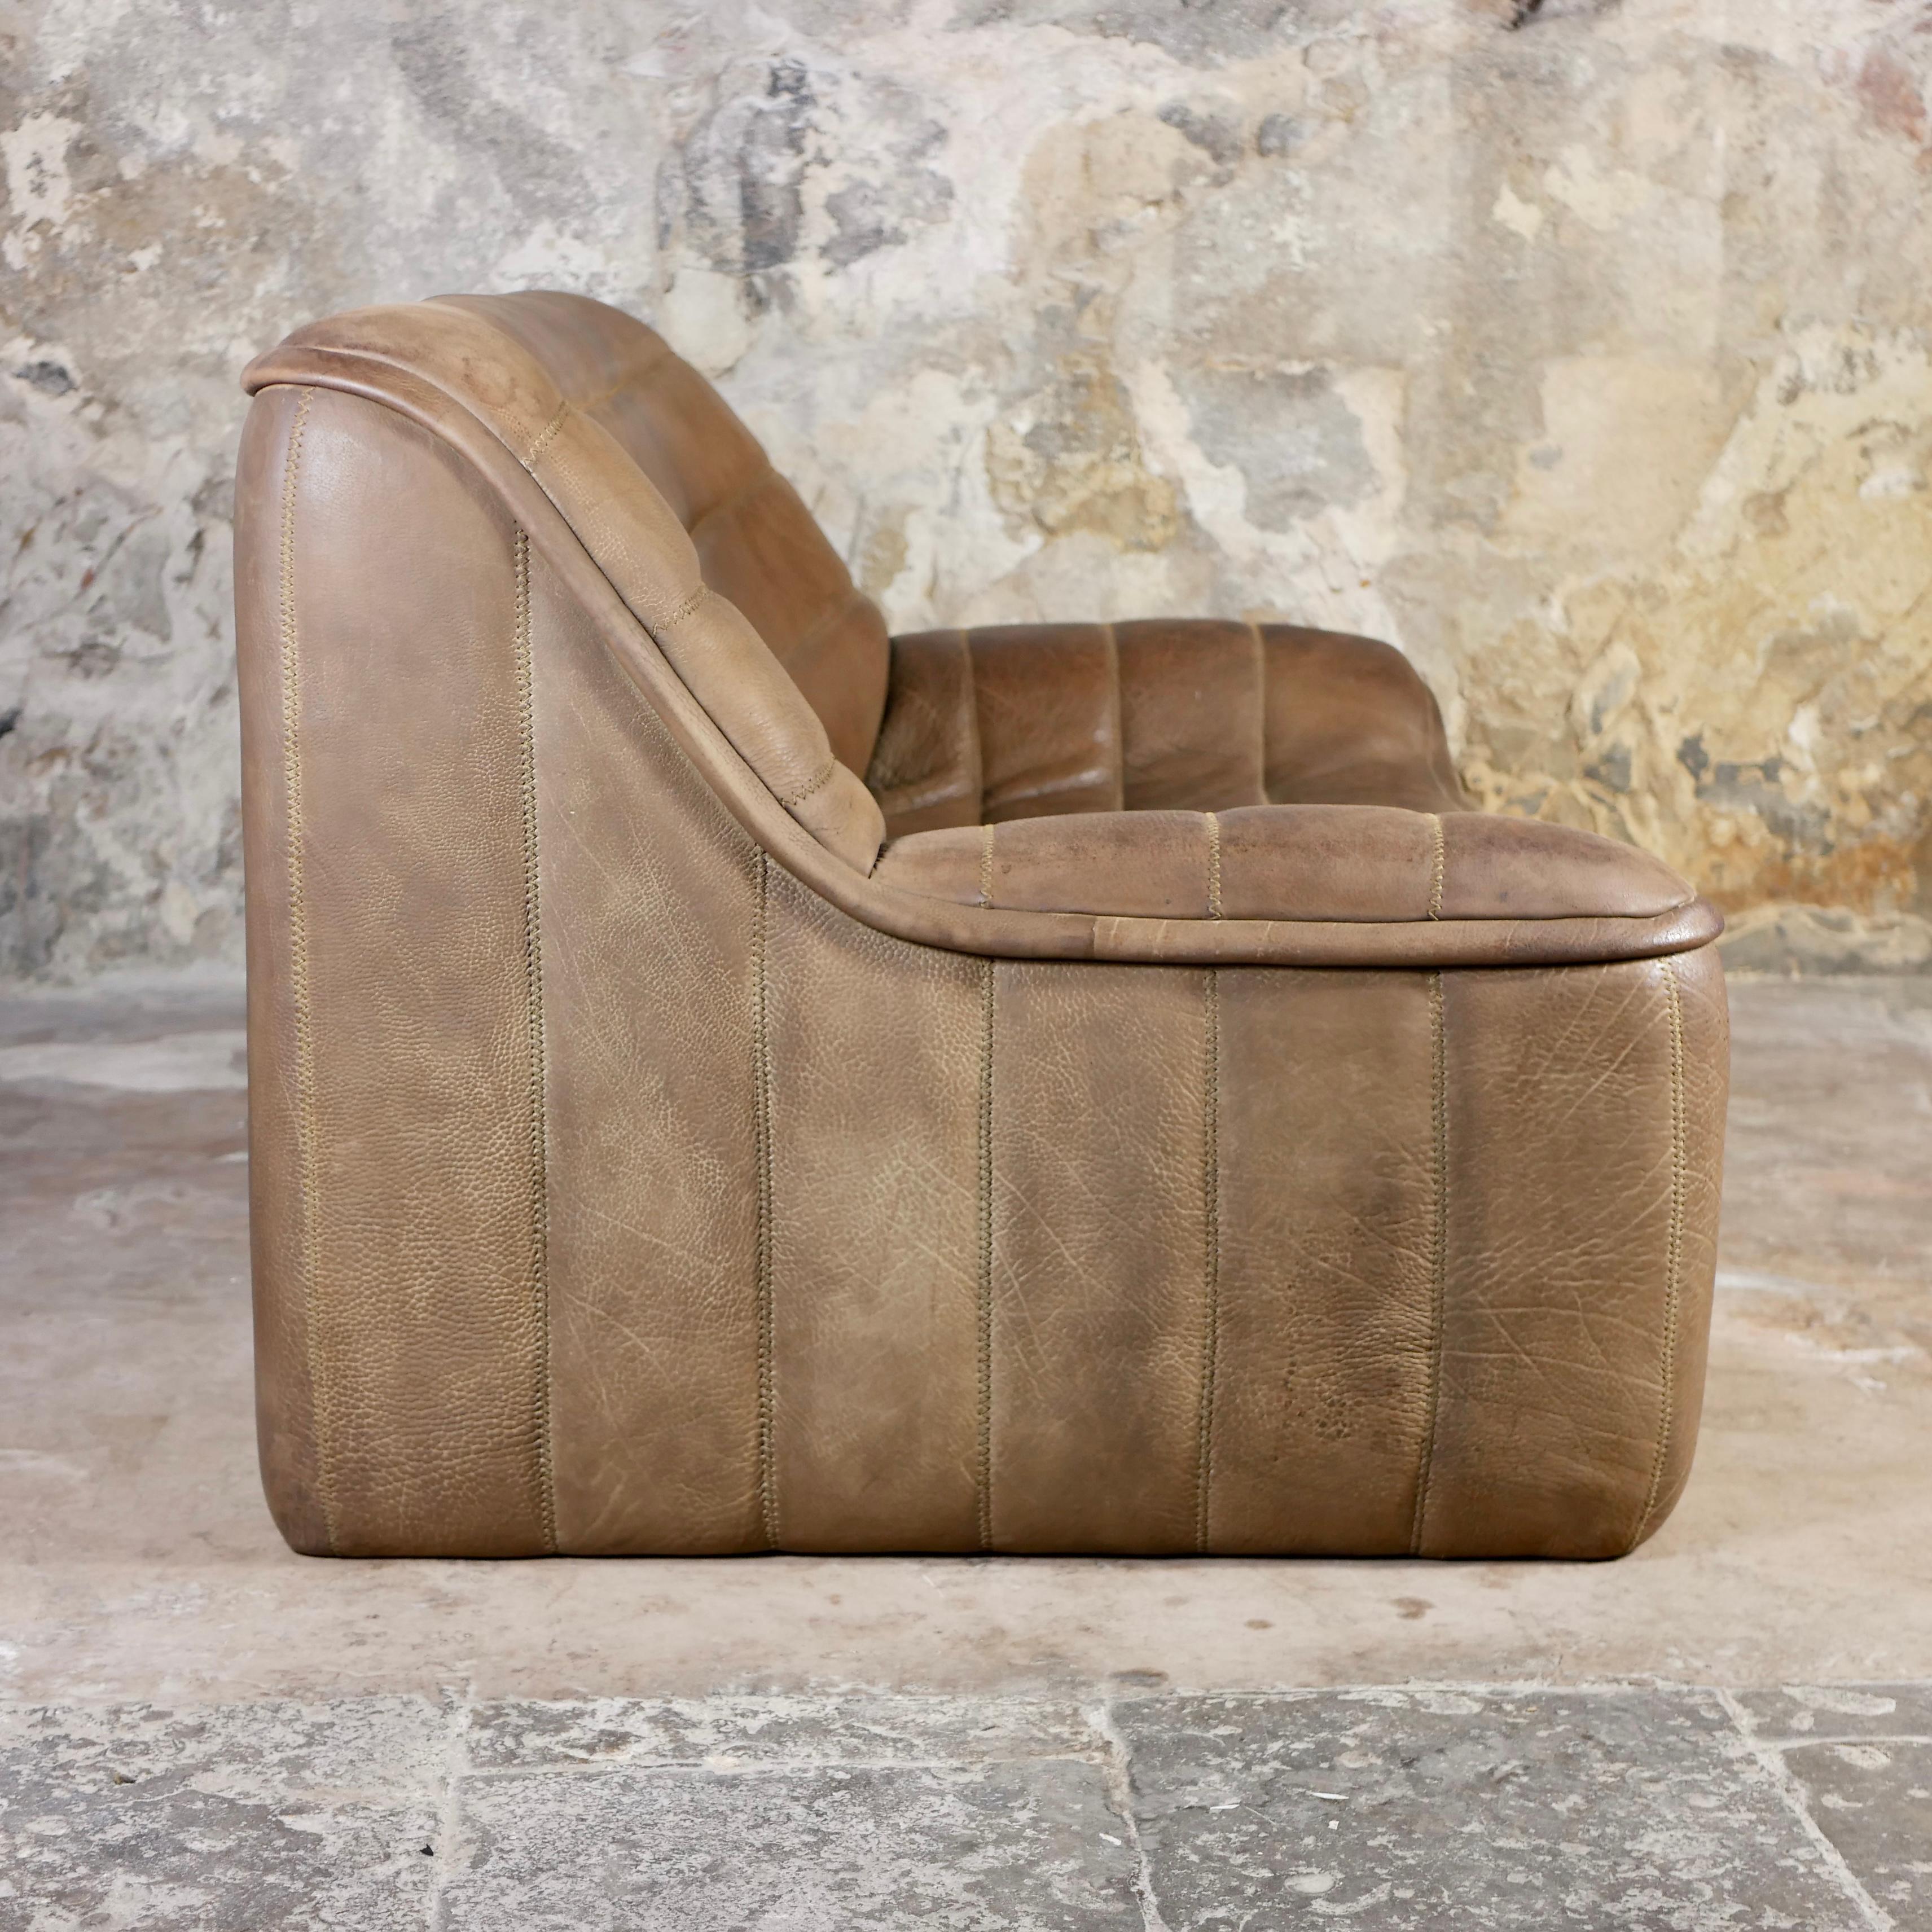 Late 20th Century De Sede DS-84 sofa in taupe buffalo leather, 1970s, from Switzerland For Sale